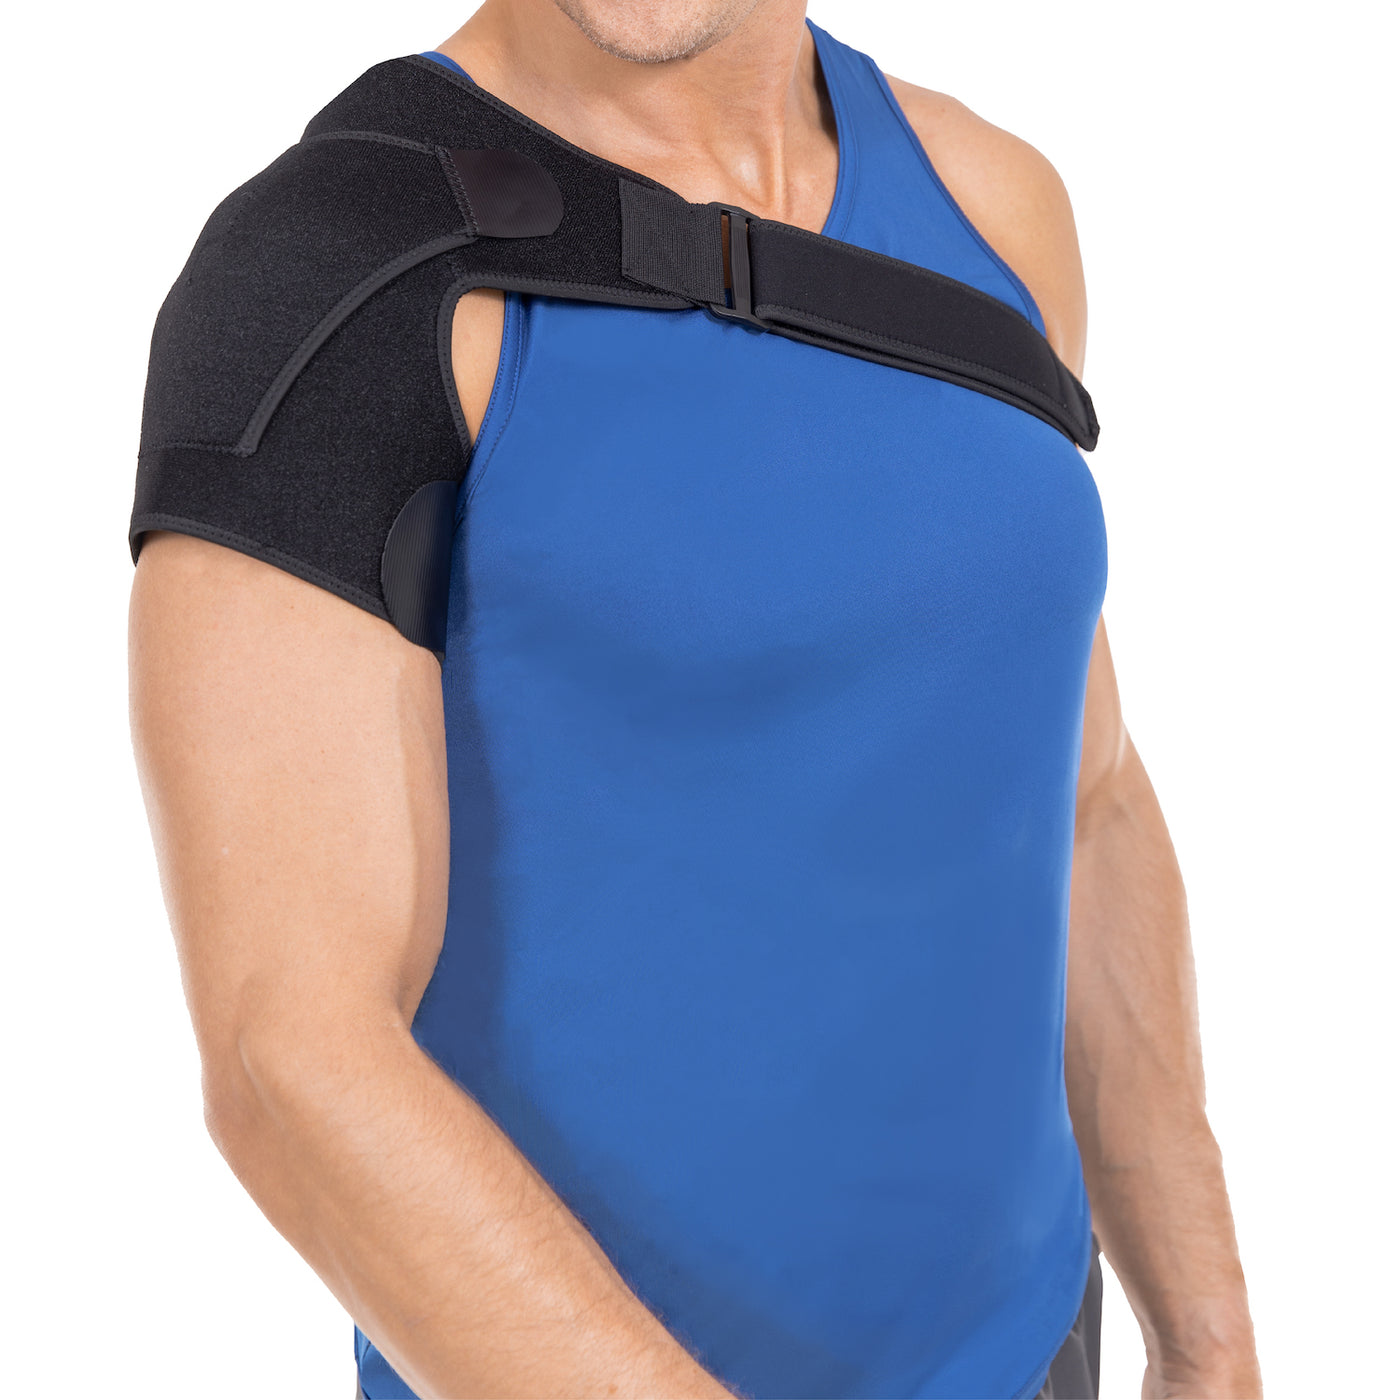 Double Shoulder Support Brace Strap Breathable Neoprene Sports Protector -  XXL